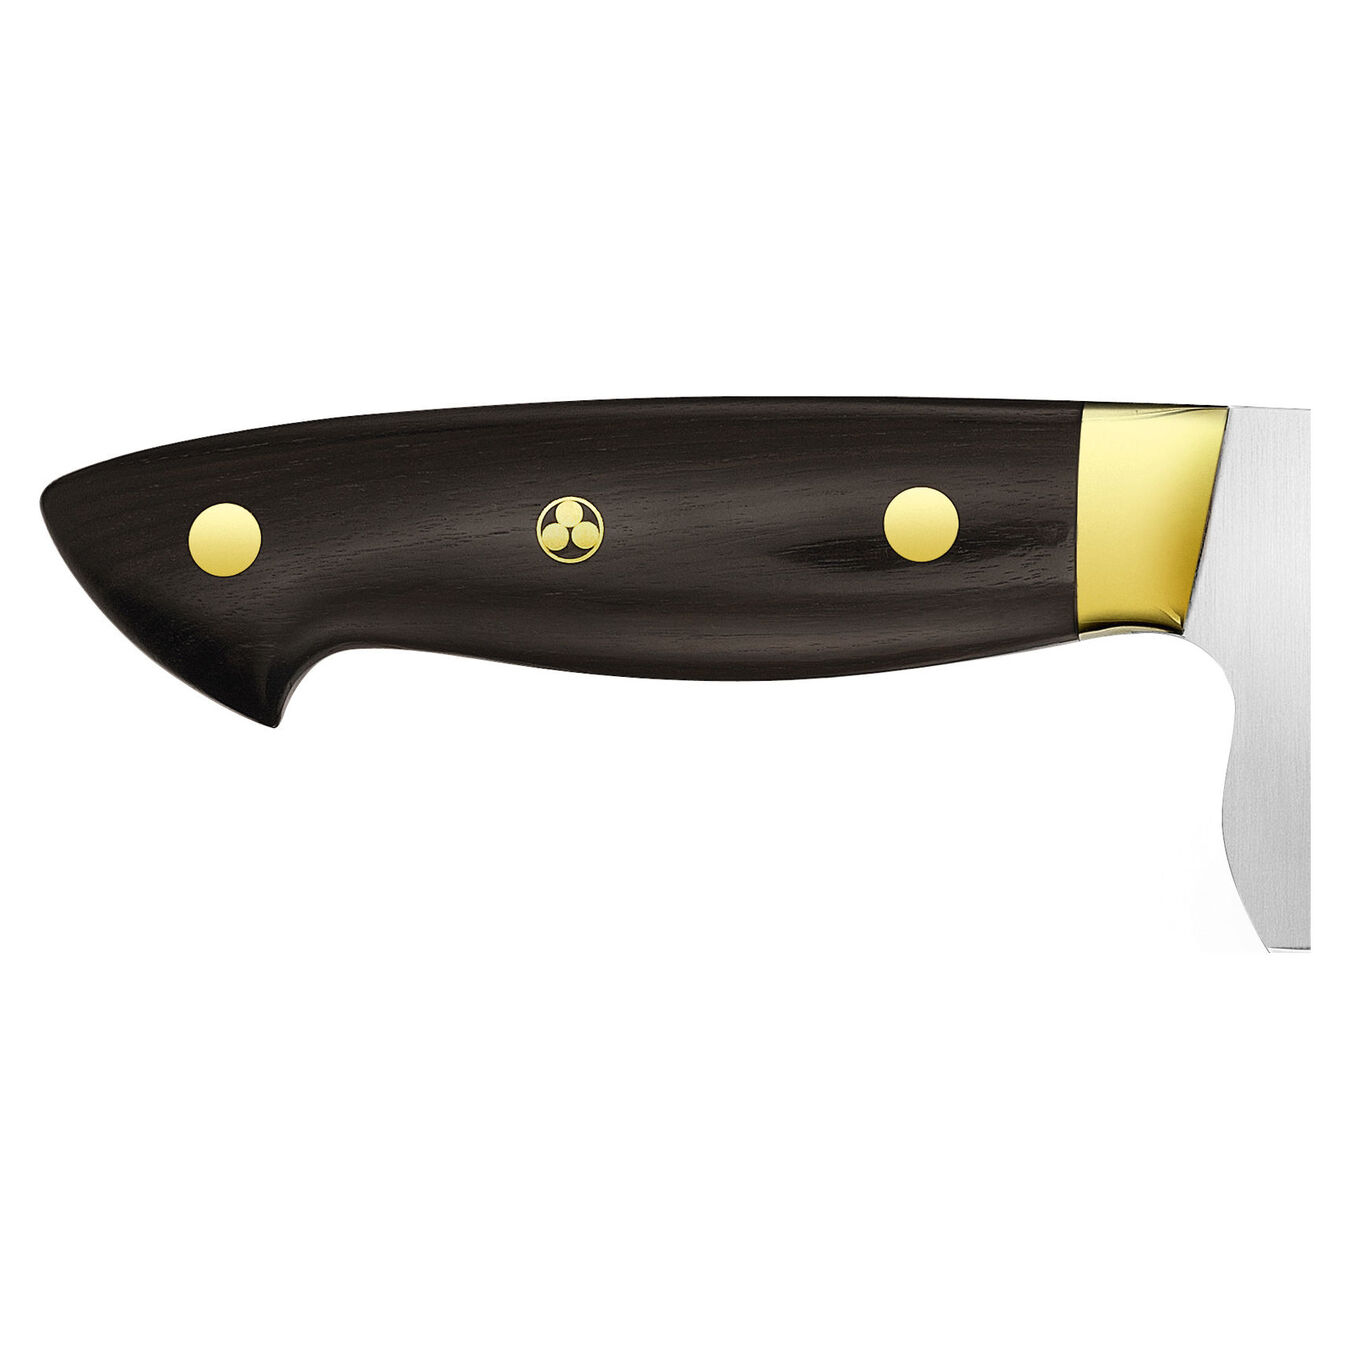 8 inch Chef's knife - Visual Imperfections,,large 3